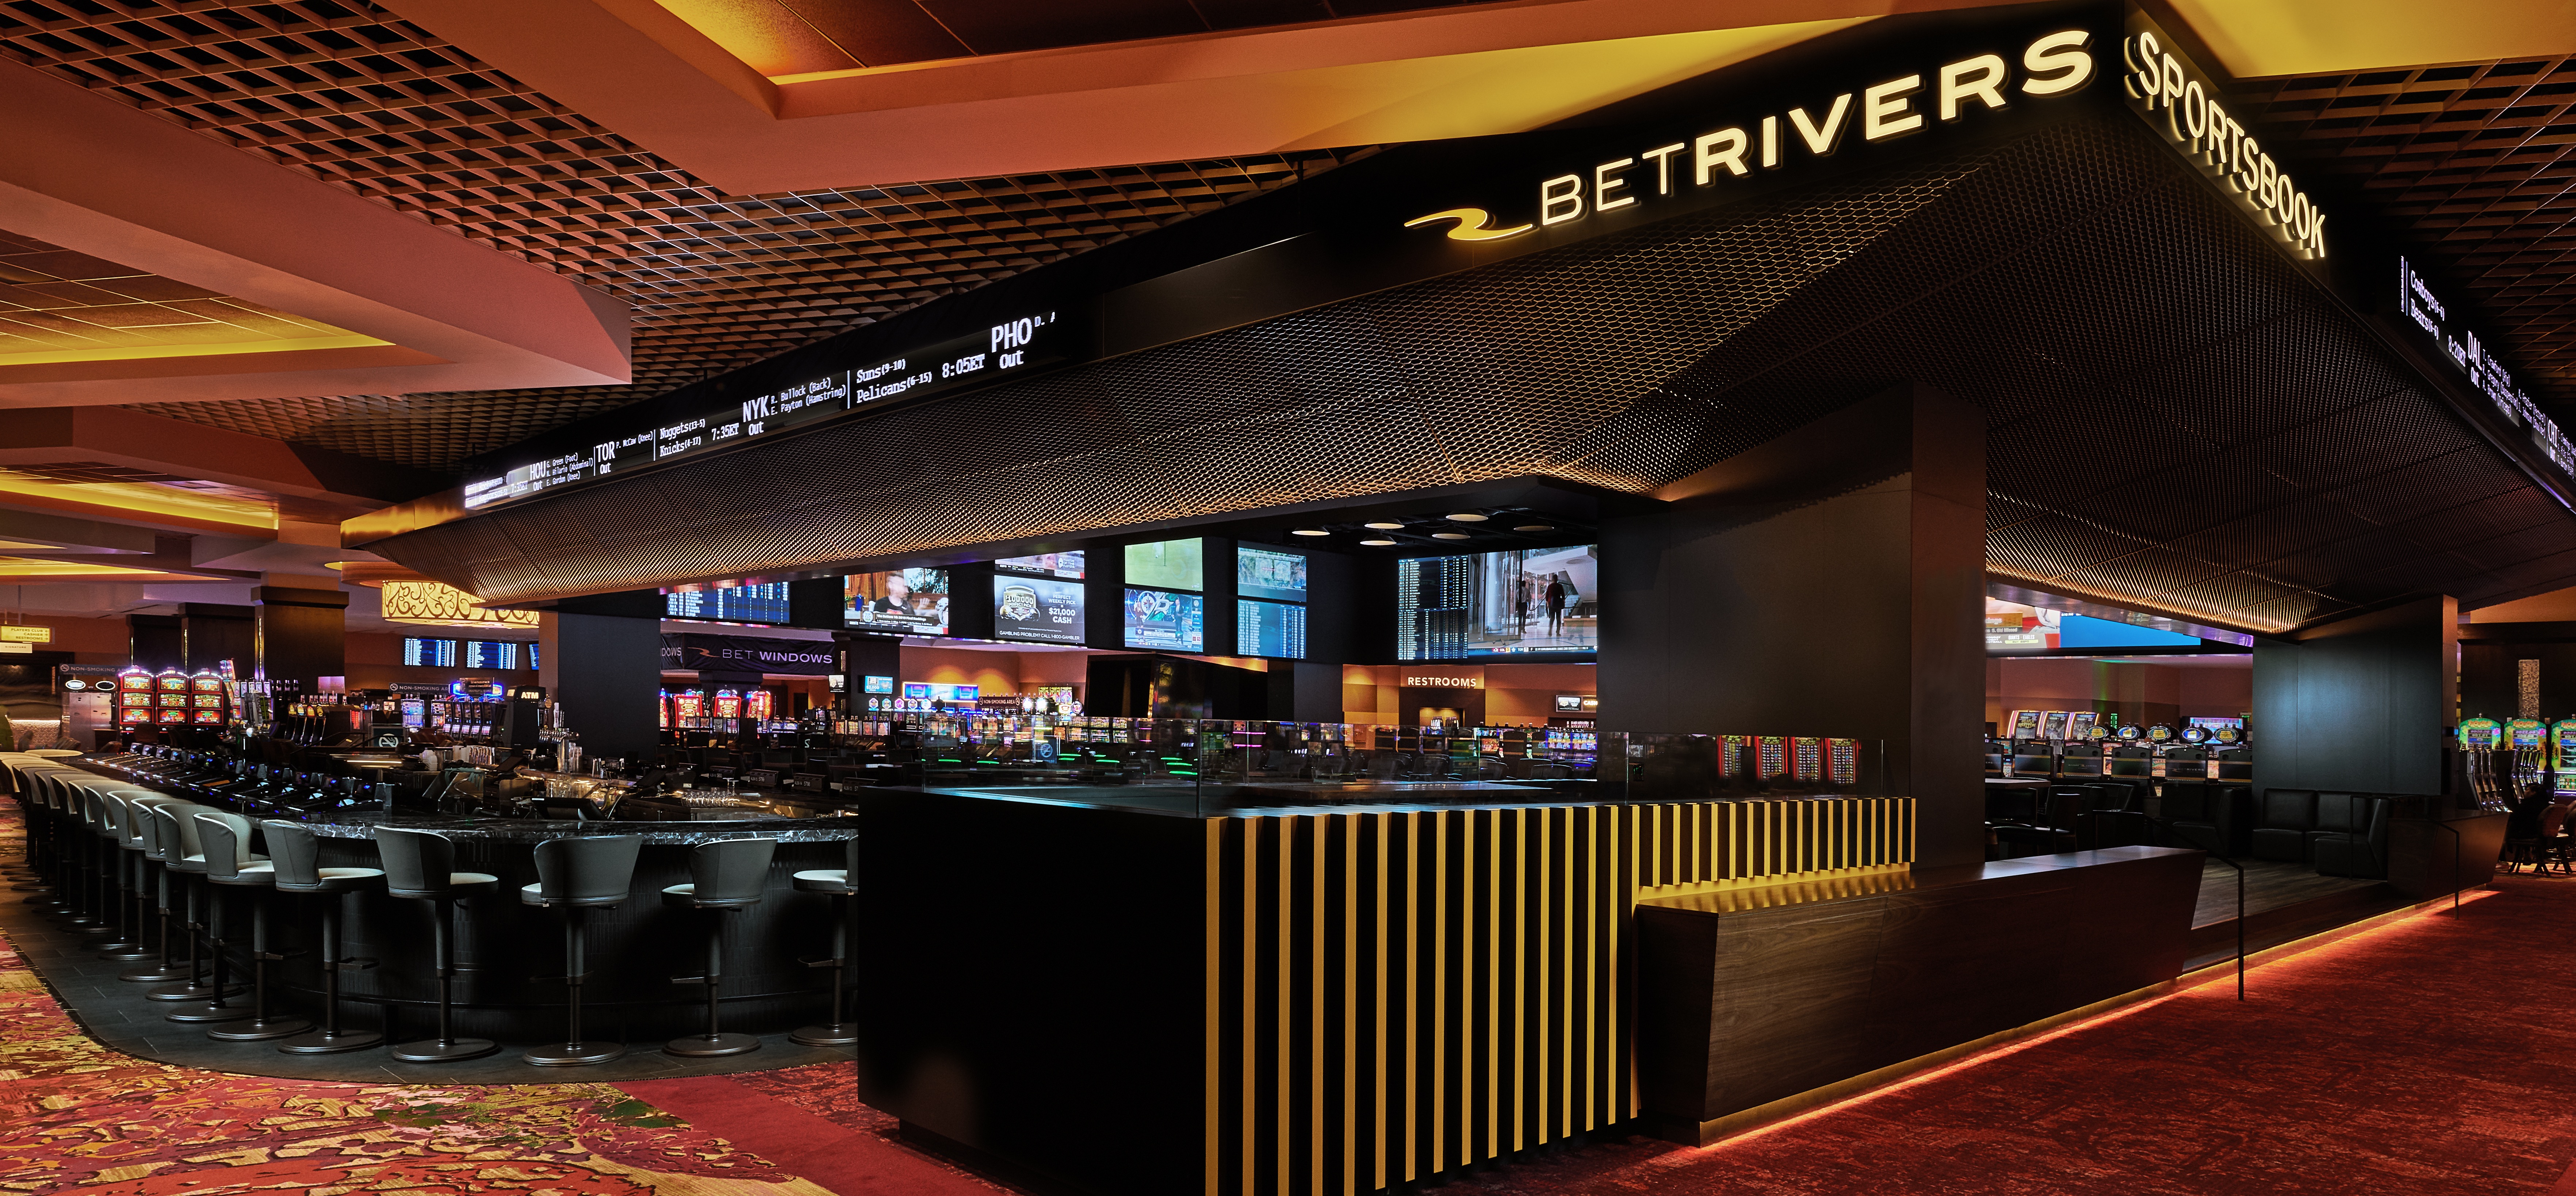 rivers casino pittsburgh online sports book